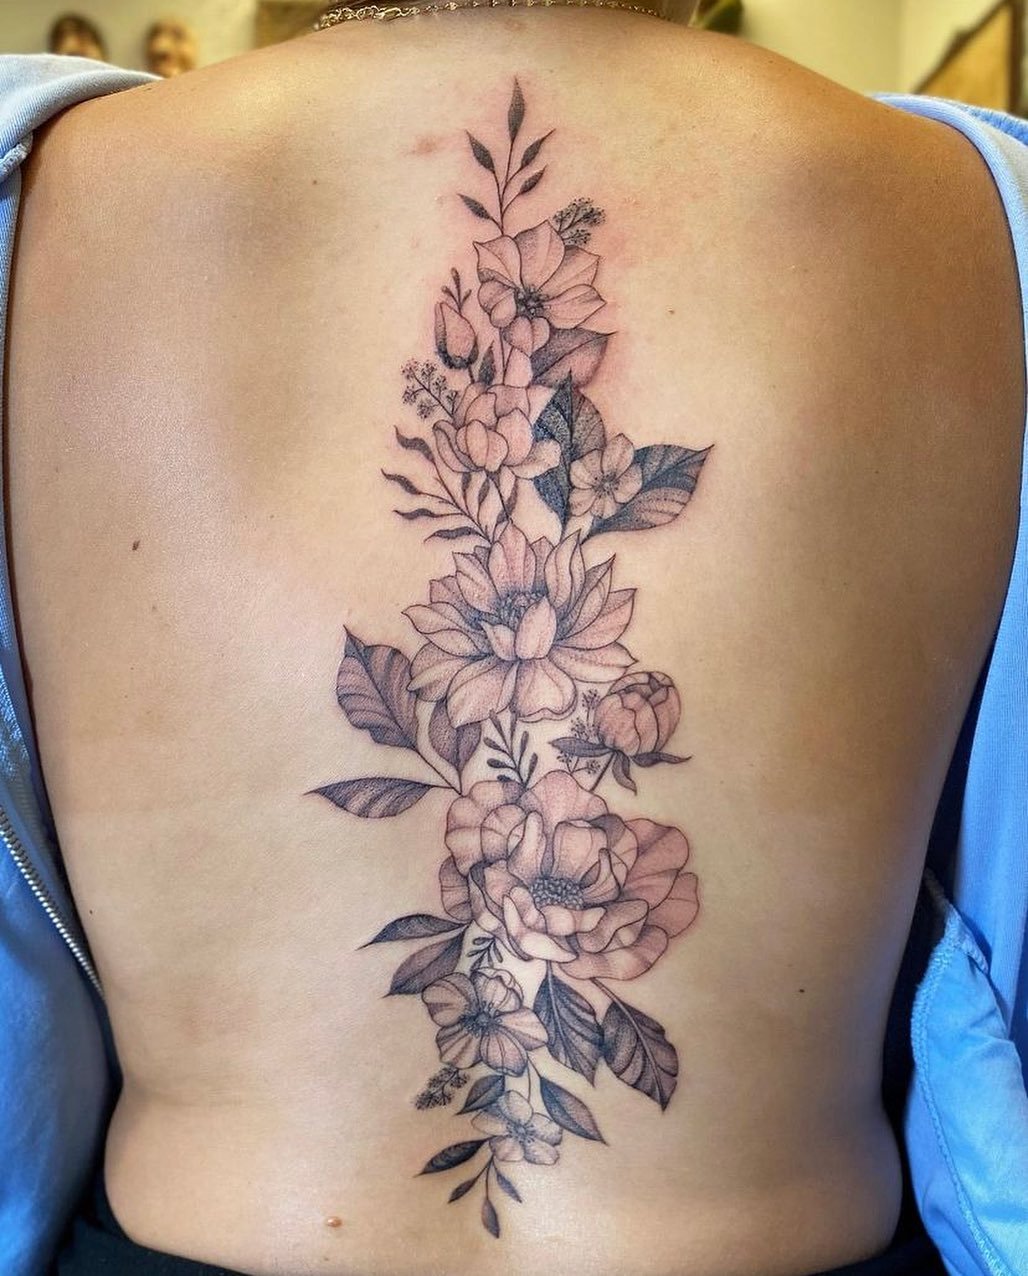 Done by Alley B @alleybangarang #alleybangarang #alleybtattoos #alleybangarangtattoos #red5va
&bull;
To book with Alley, call the studio for consult times, and information.